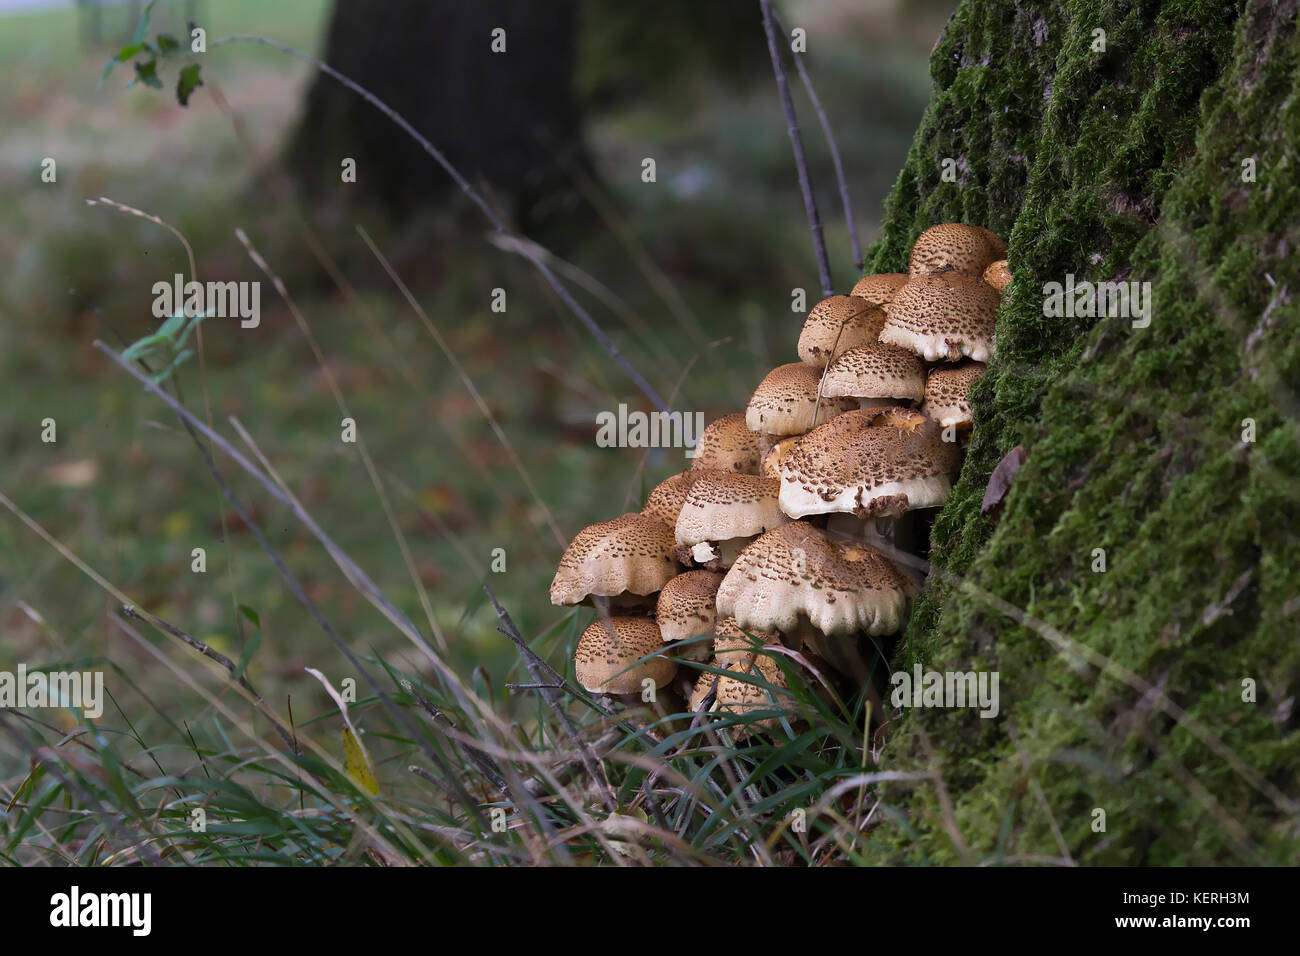 These Mushrooms made a nice composition against the Green Moss on the tree trunk Stock Photo